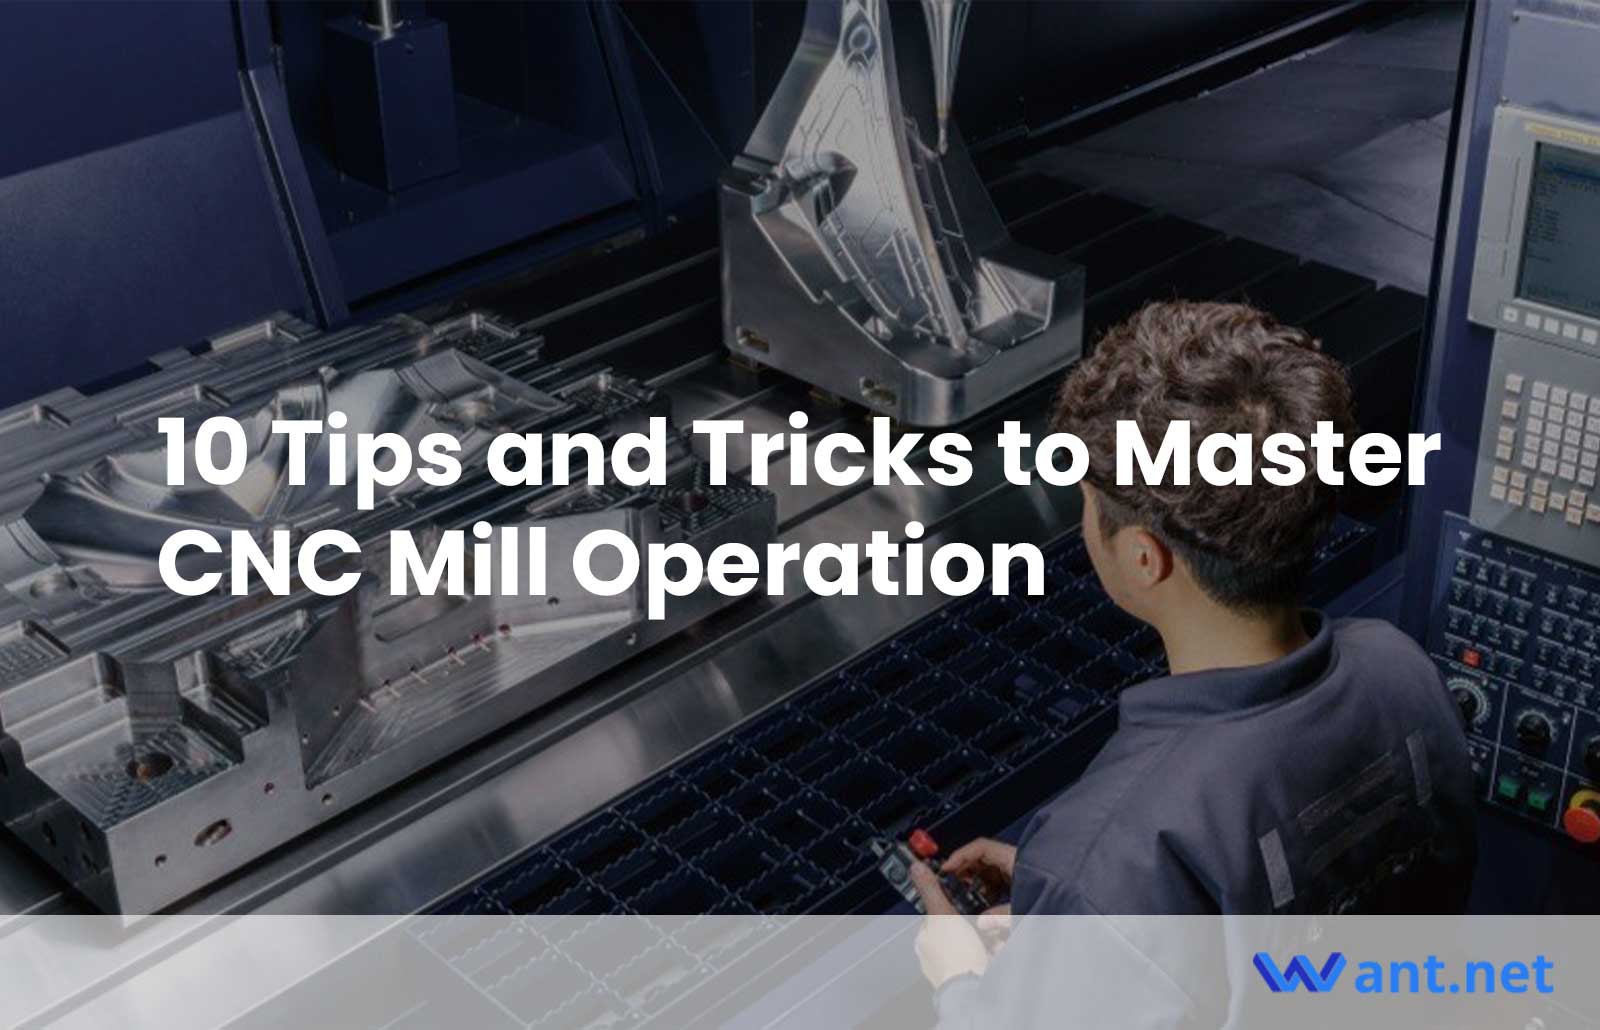 10 Tips and Tricks to Master CNC Mill Operation